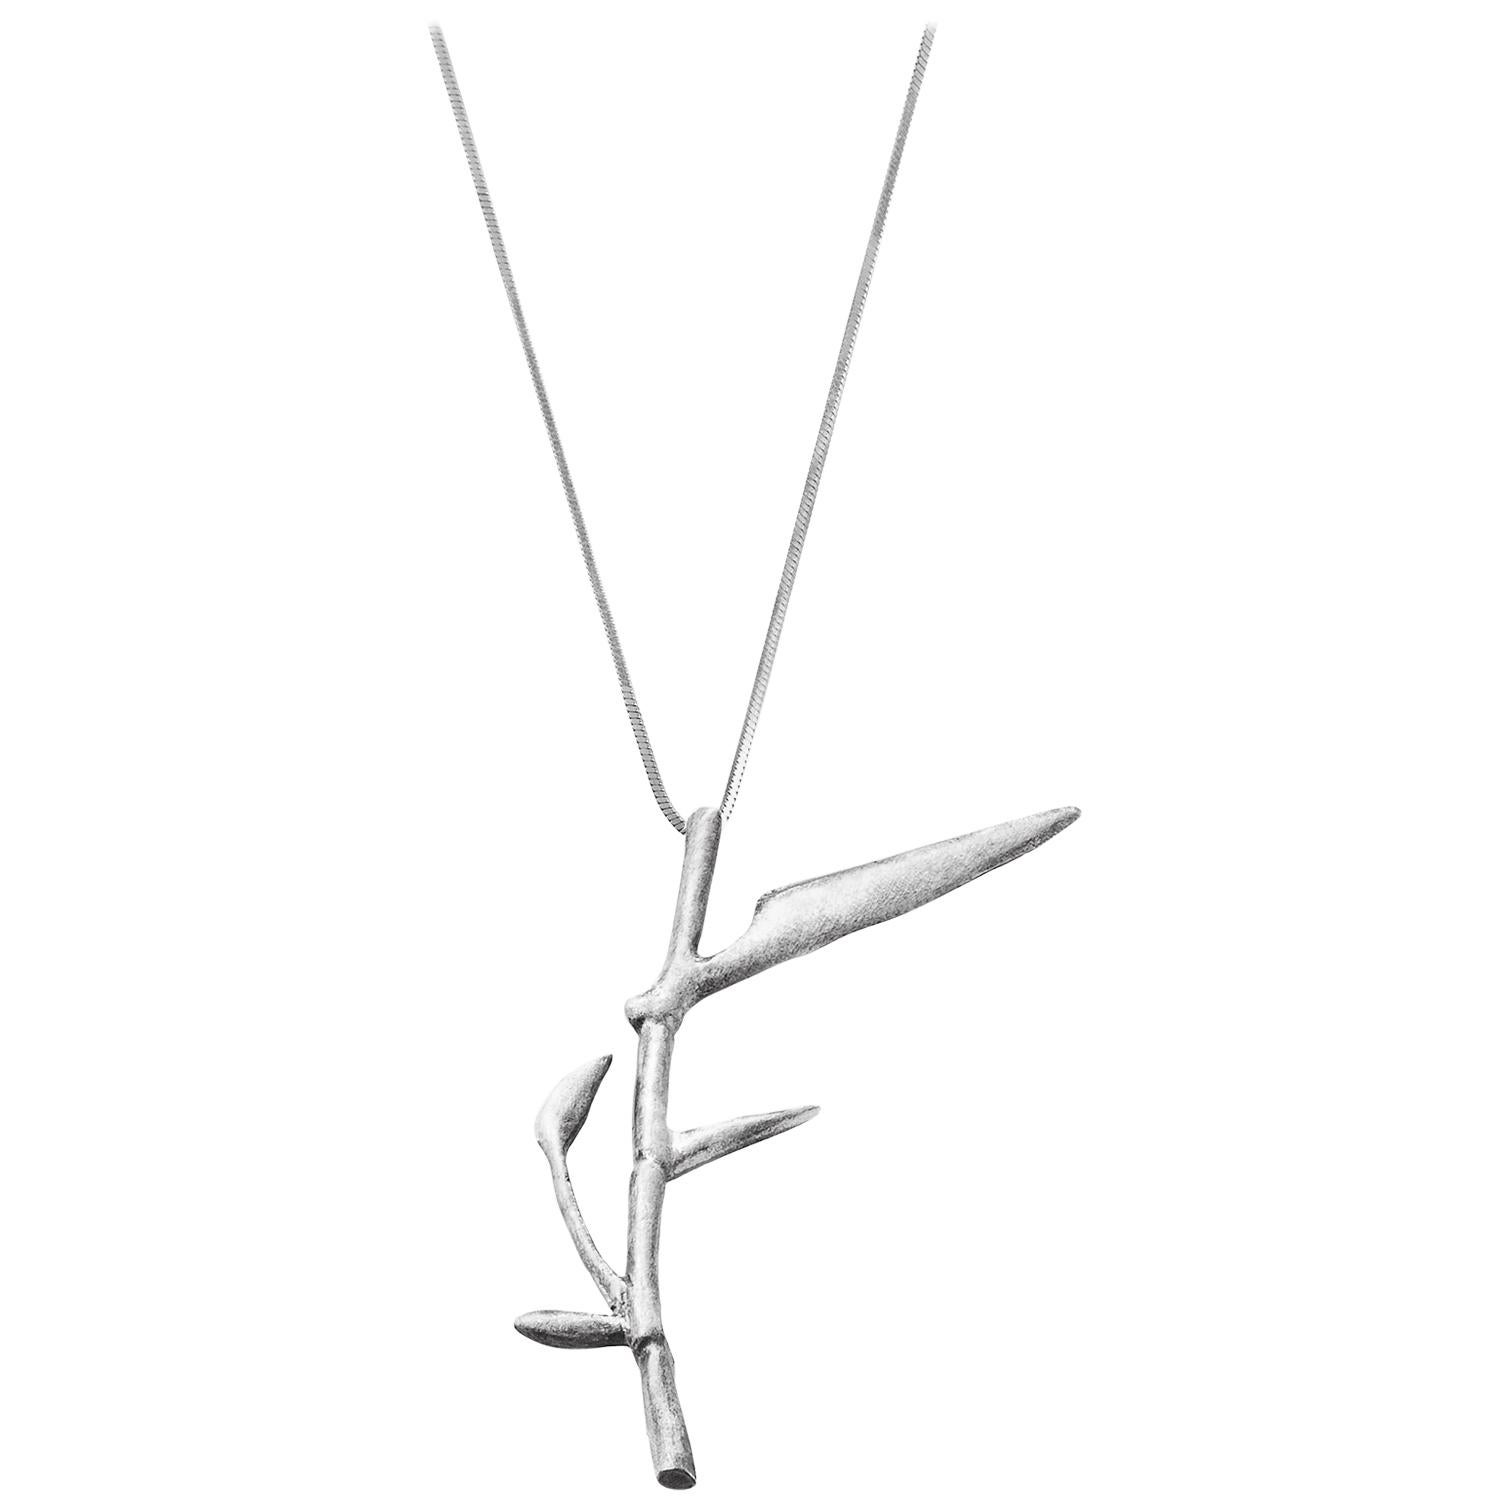 Bamboo Garden Pendant in Sterling Silver N3 by the Artist For Sale